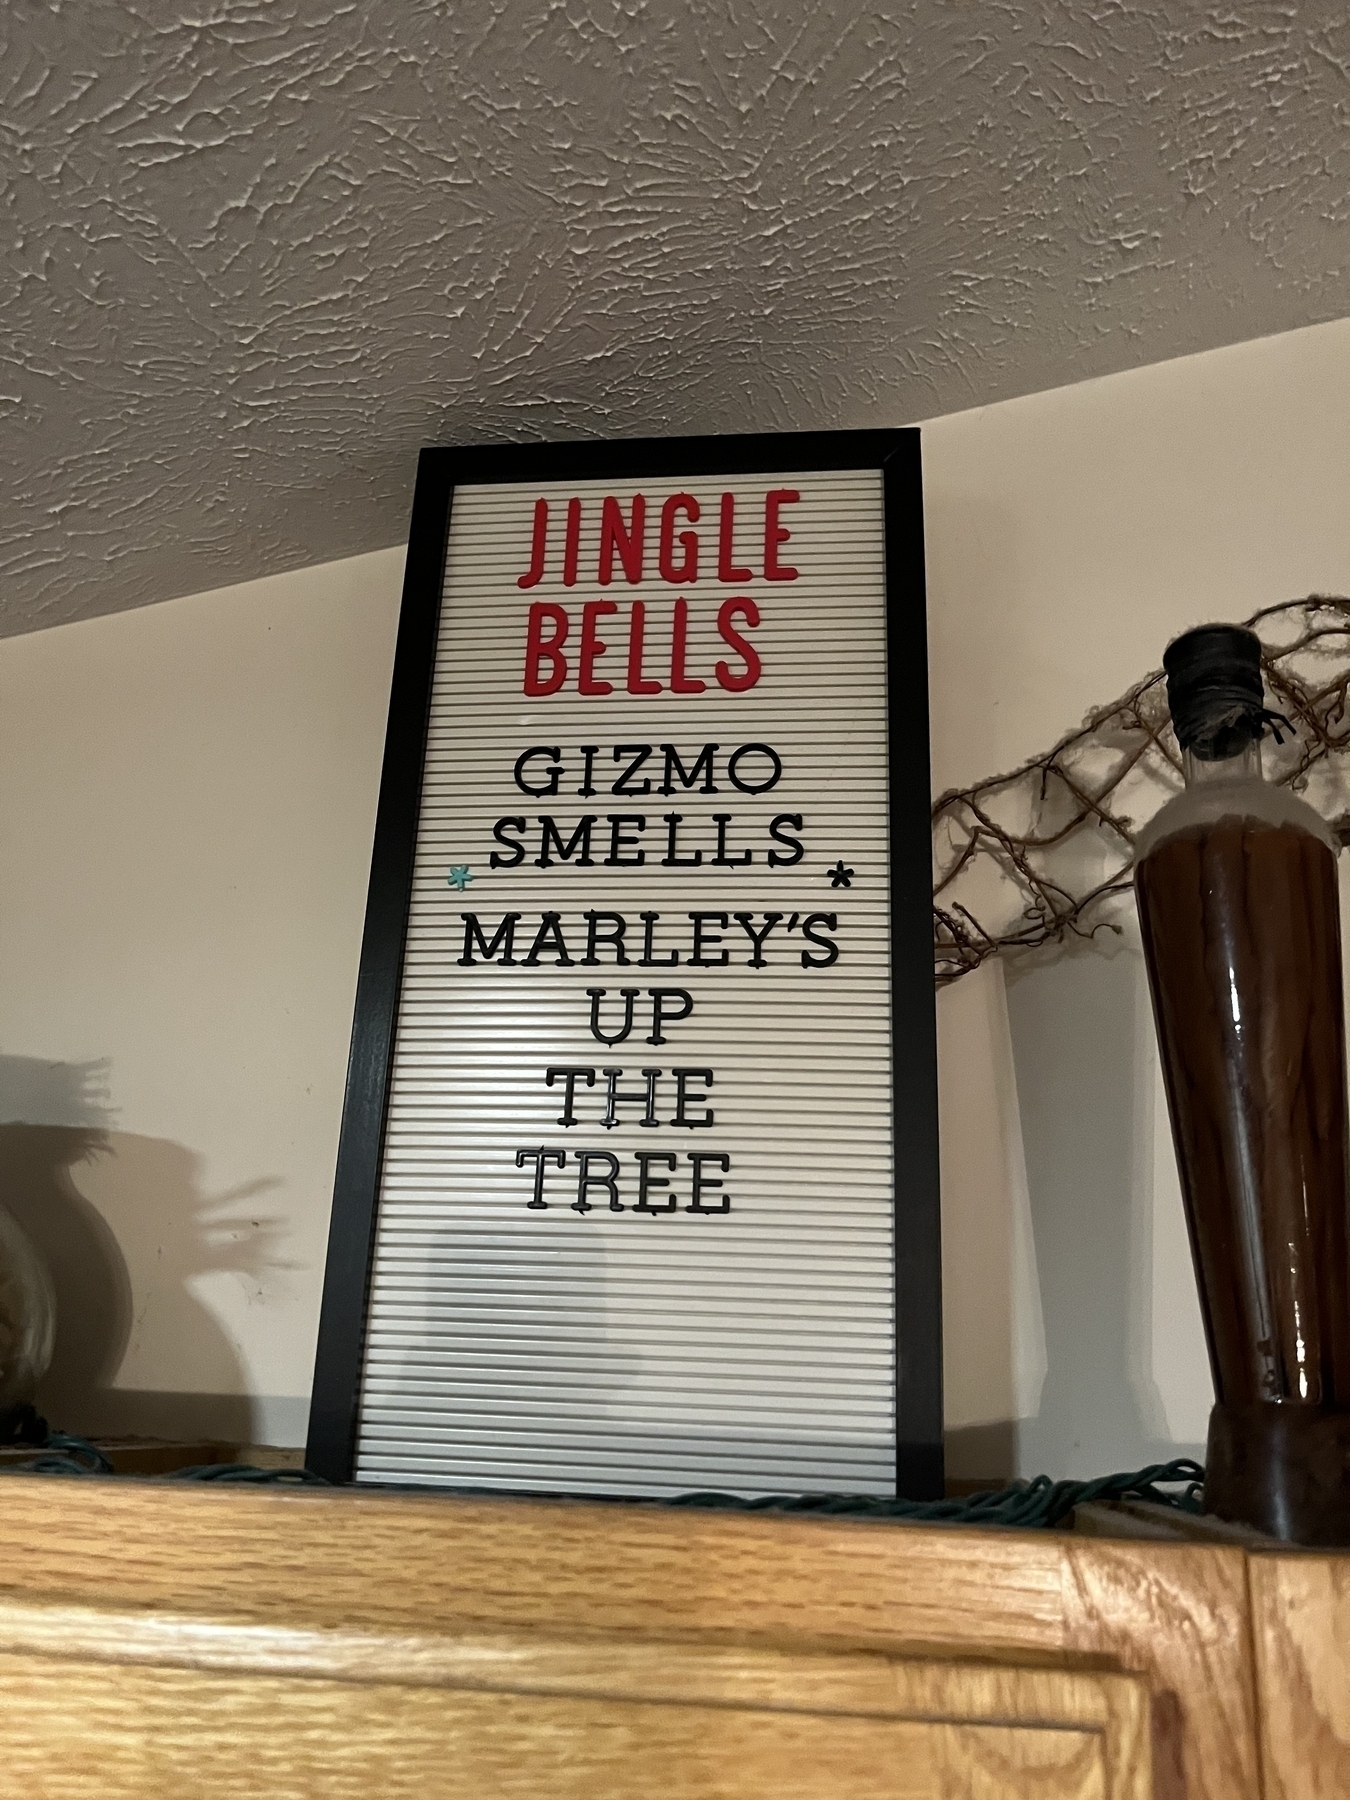 An add-your-own-text sign that says “jingle bells, gizmo smells, Marley’s up the tree”.